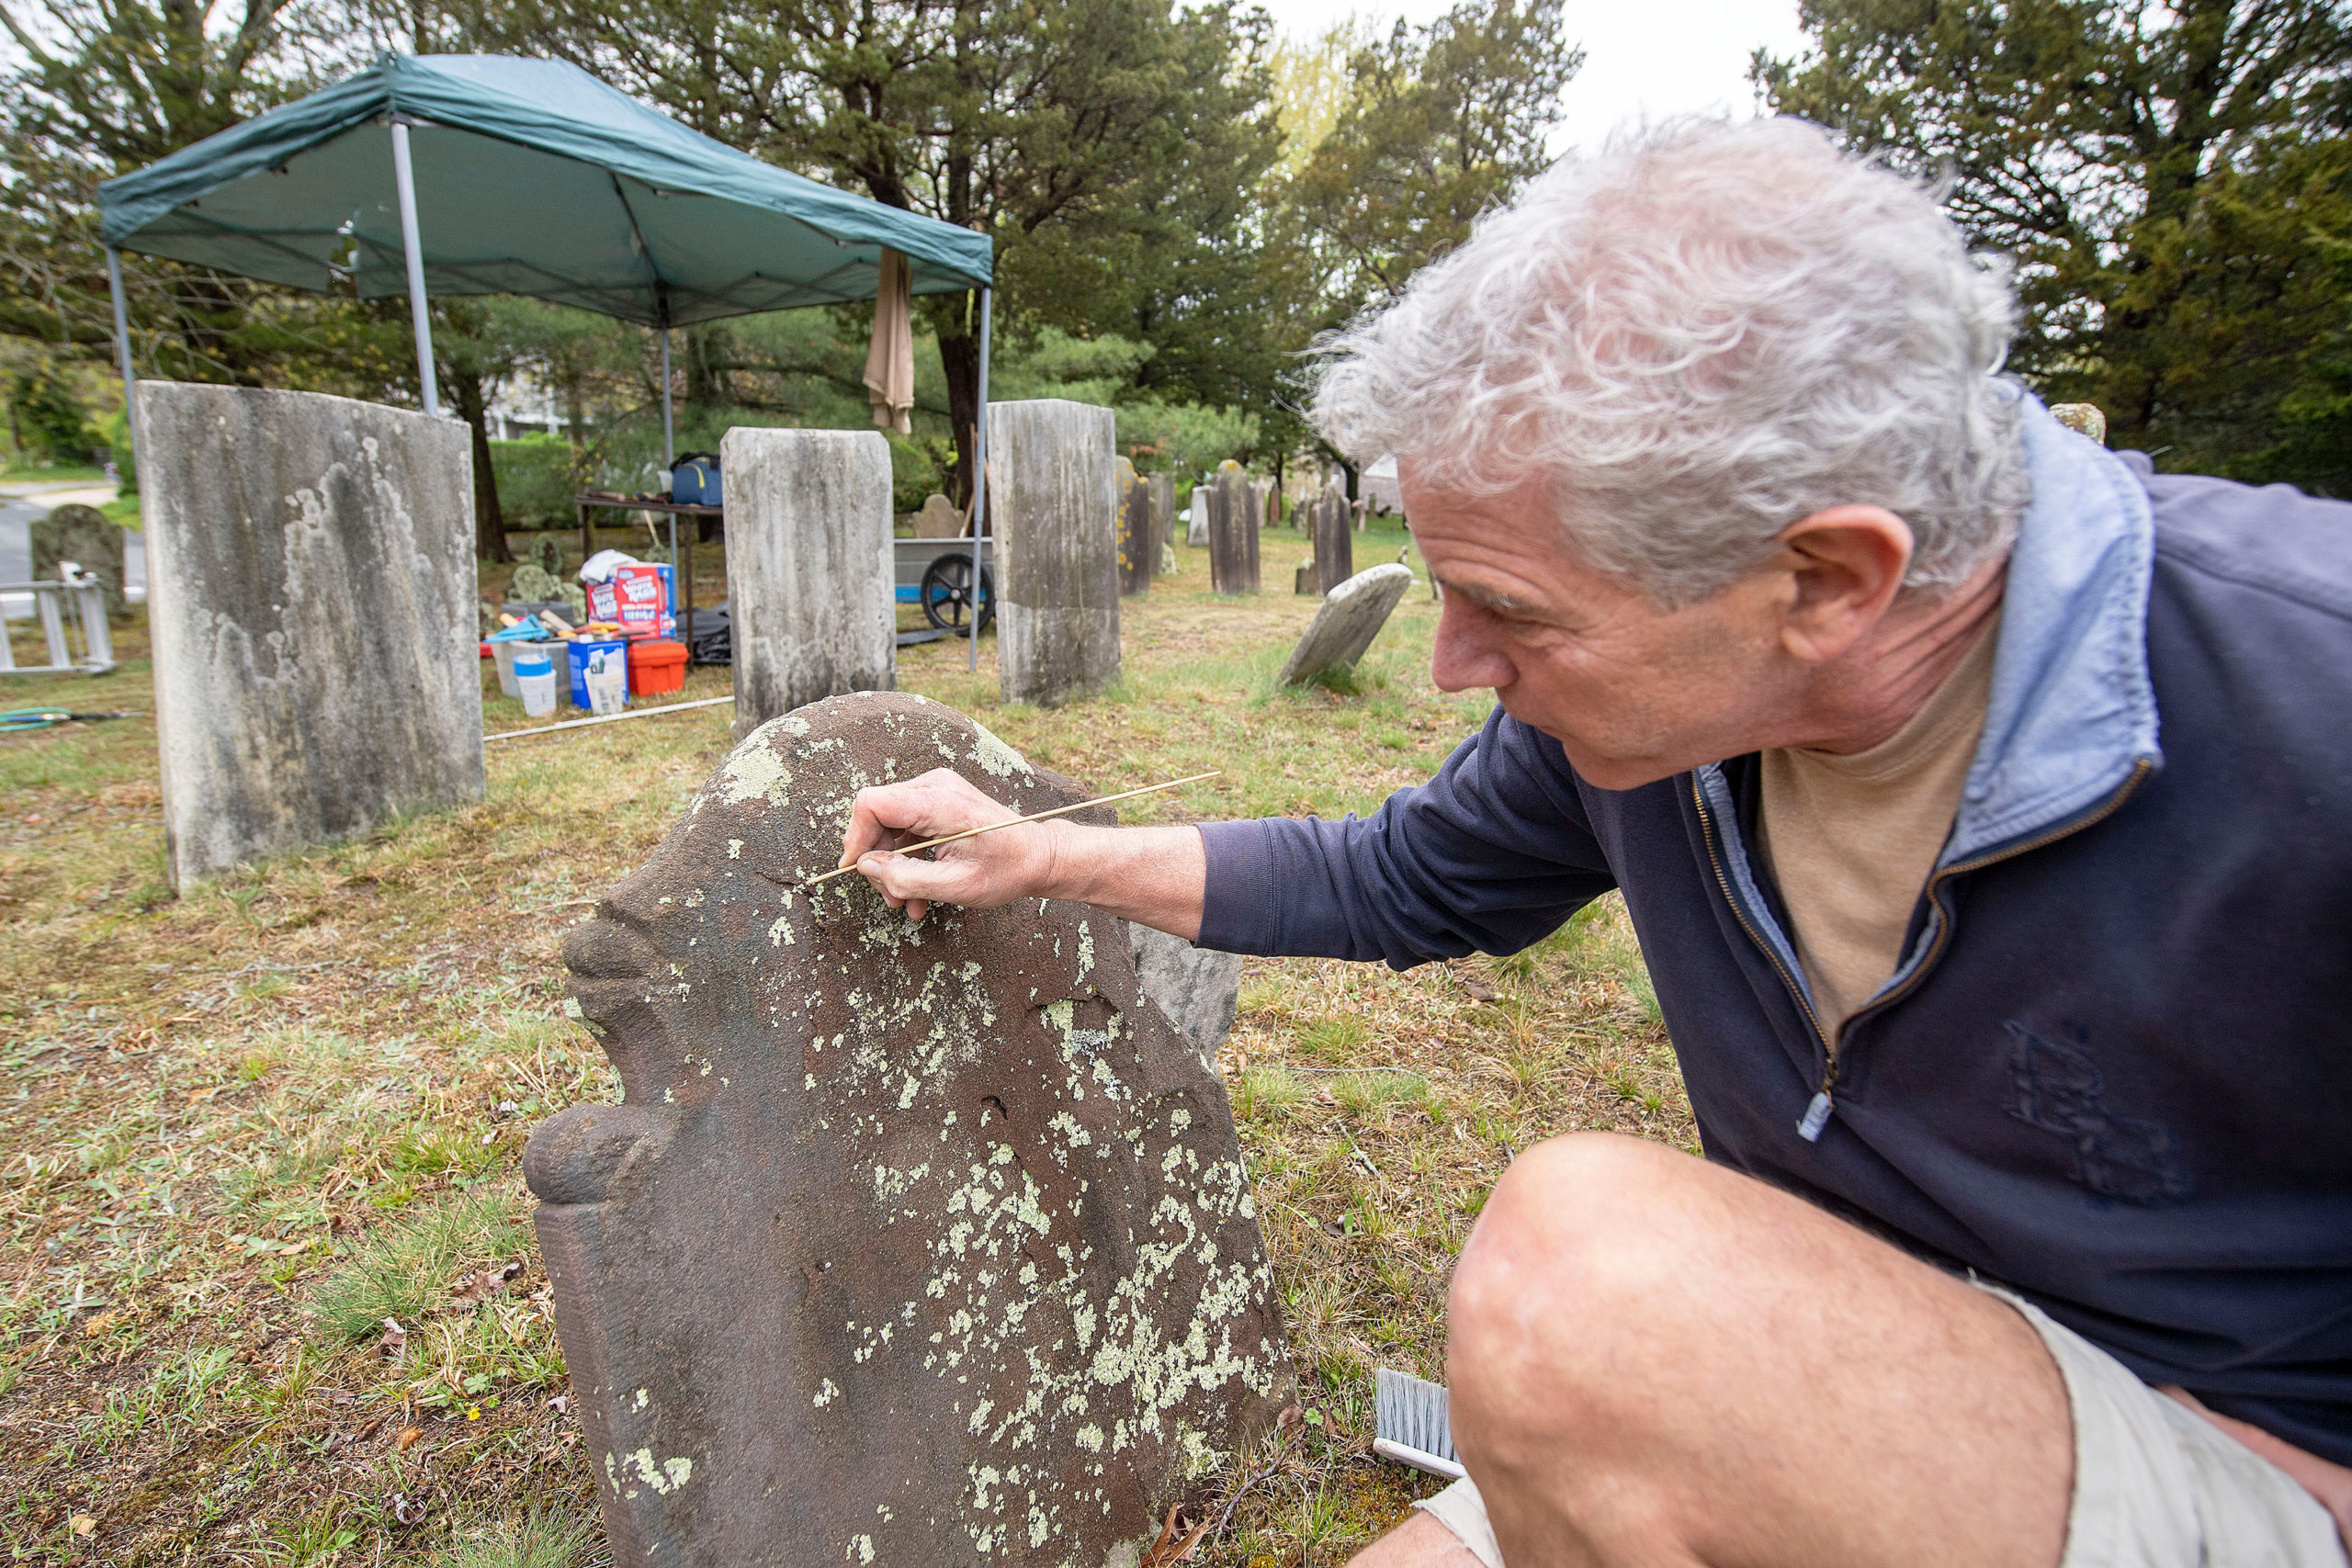 Burying Ground Preservation Group Partner Kurt Kahofer scrapes lichen off of a headstone during the early stages of the renovation and preservation process taking place at the Old Burying Ground adjacent to the Sag Harbor Old Whalers Church on  May 4.  MICHAEL HELLER